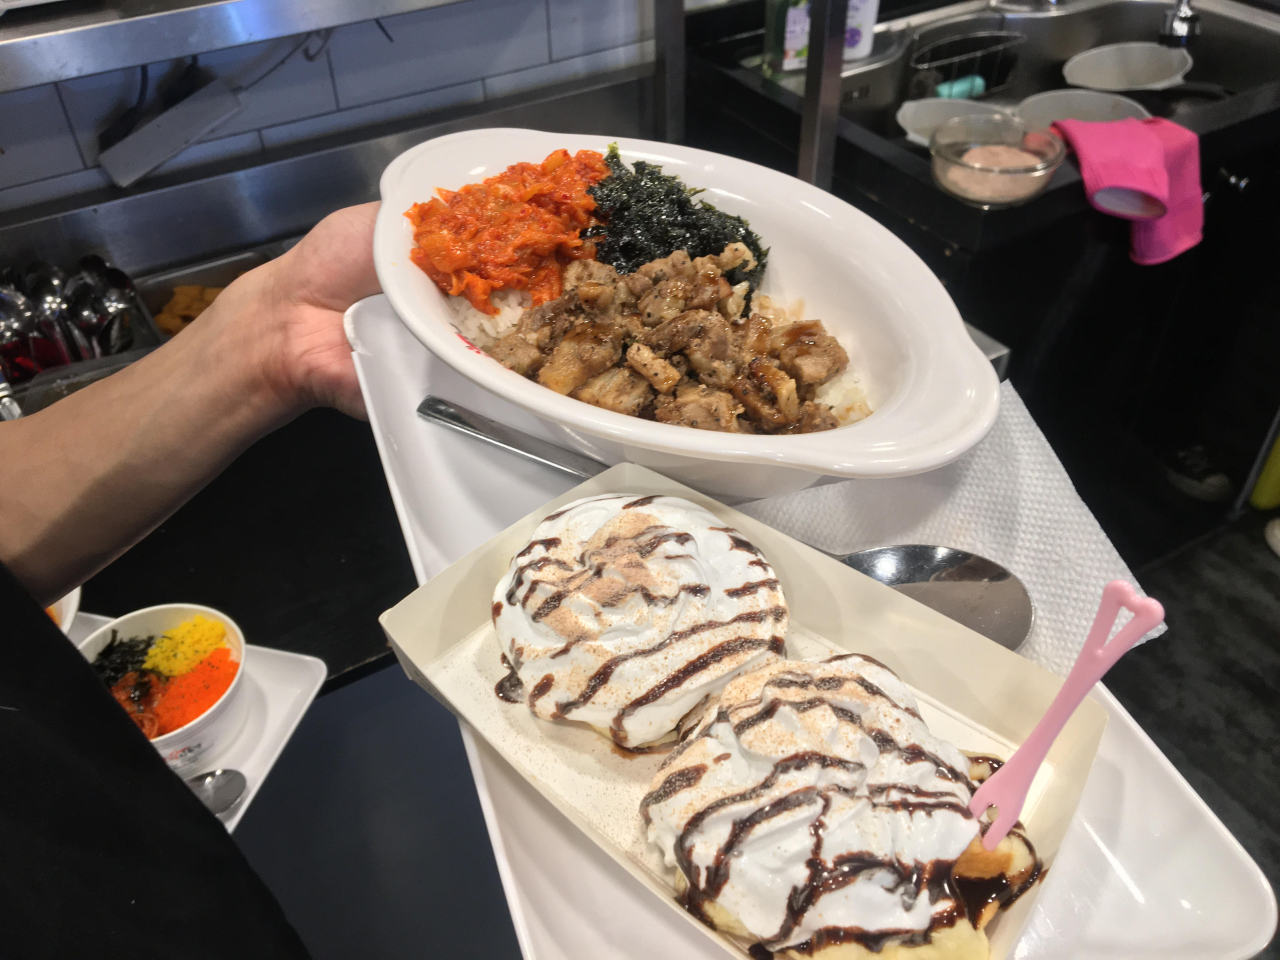 Belgian waffles with whipped cream and chocolate syrup on top and roasted sweet pork belly bowl with fried kimchi. (Kim Byung-wook/The Korea Herald)